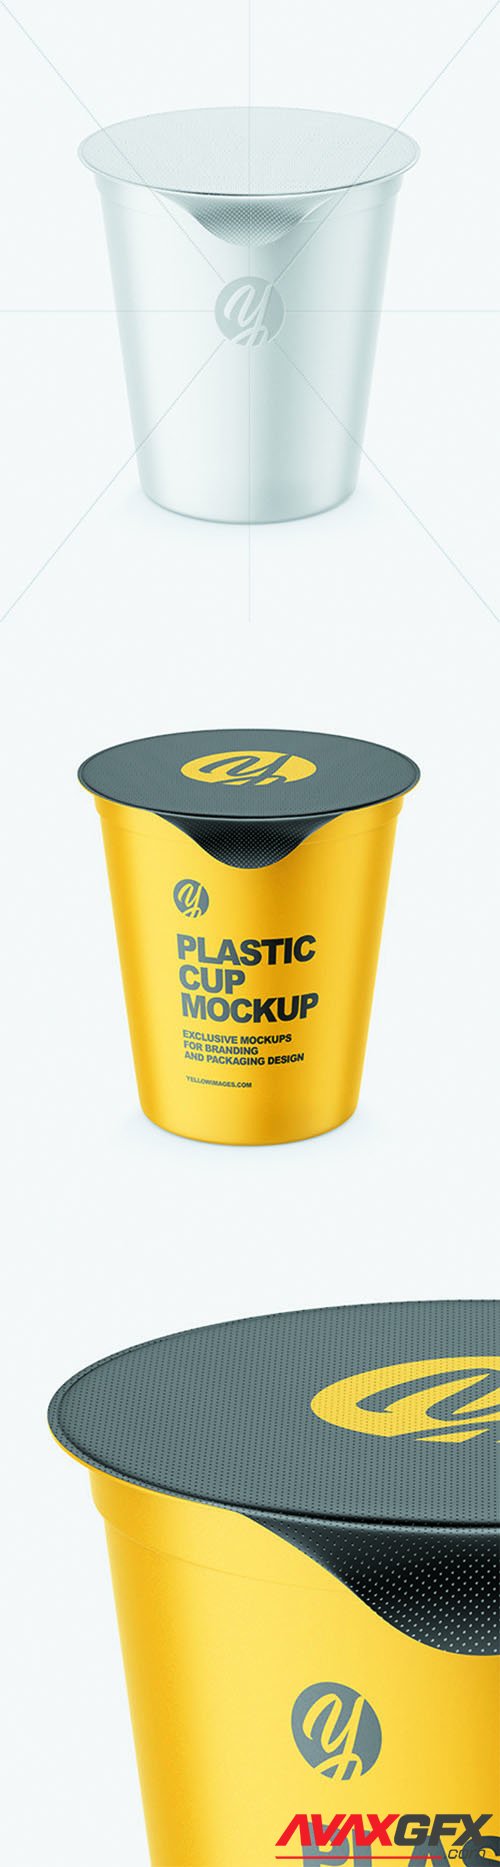 Download Plastic Cup Mockup 68423 » AVAXGFX - All Downloads that You Need in One Place! Graphic from ...